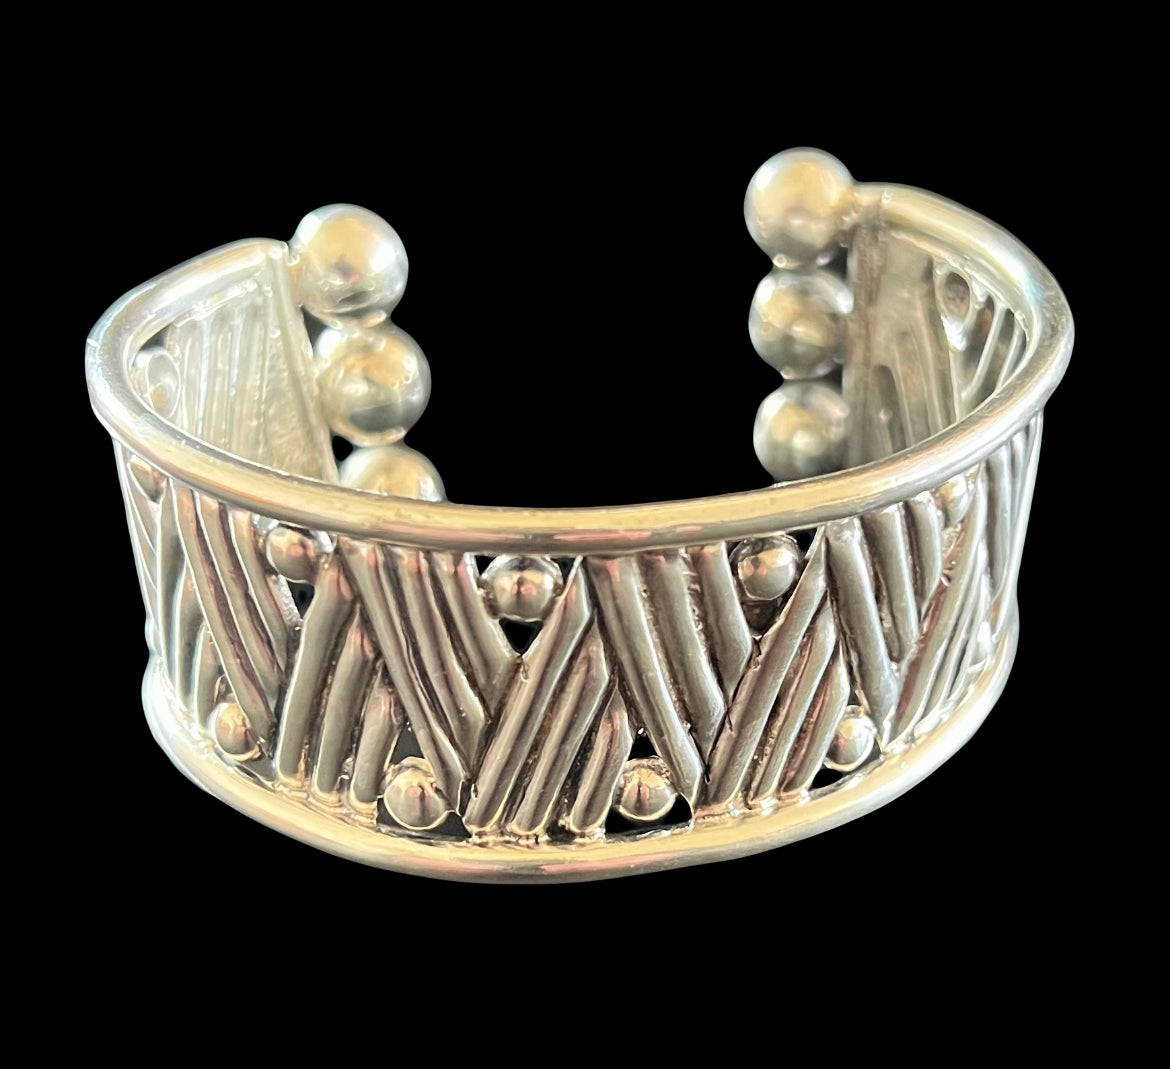 William Spratling Taxco Mexico Sterling Silver Repousse Cuff Bracelet Ca. 1940s